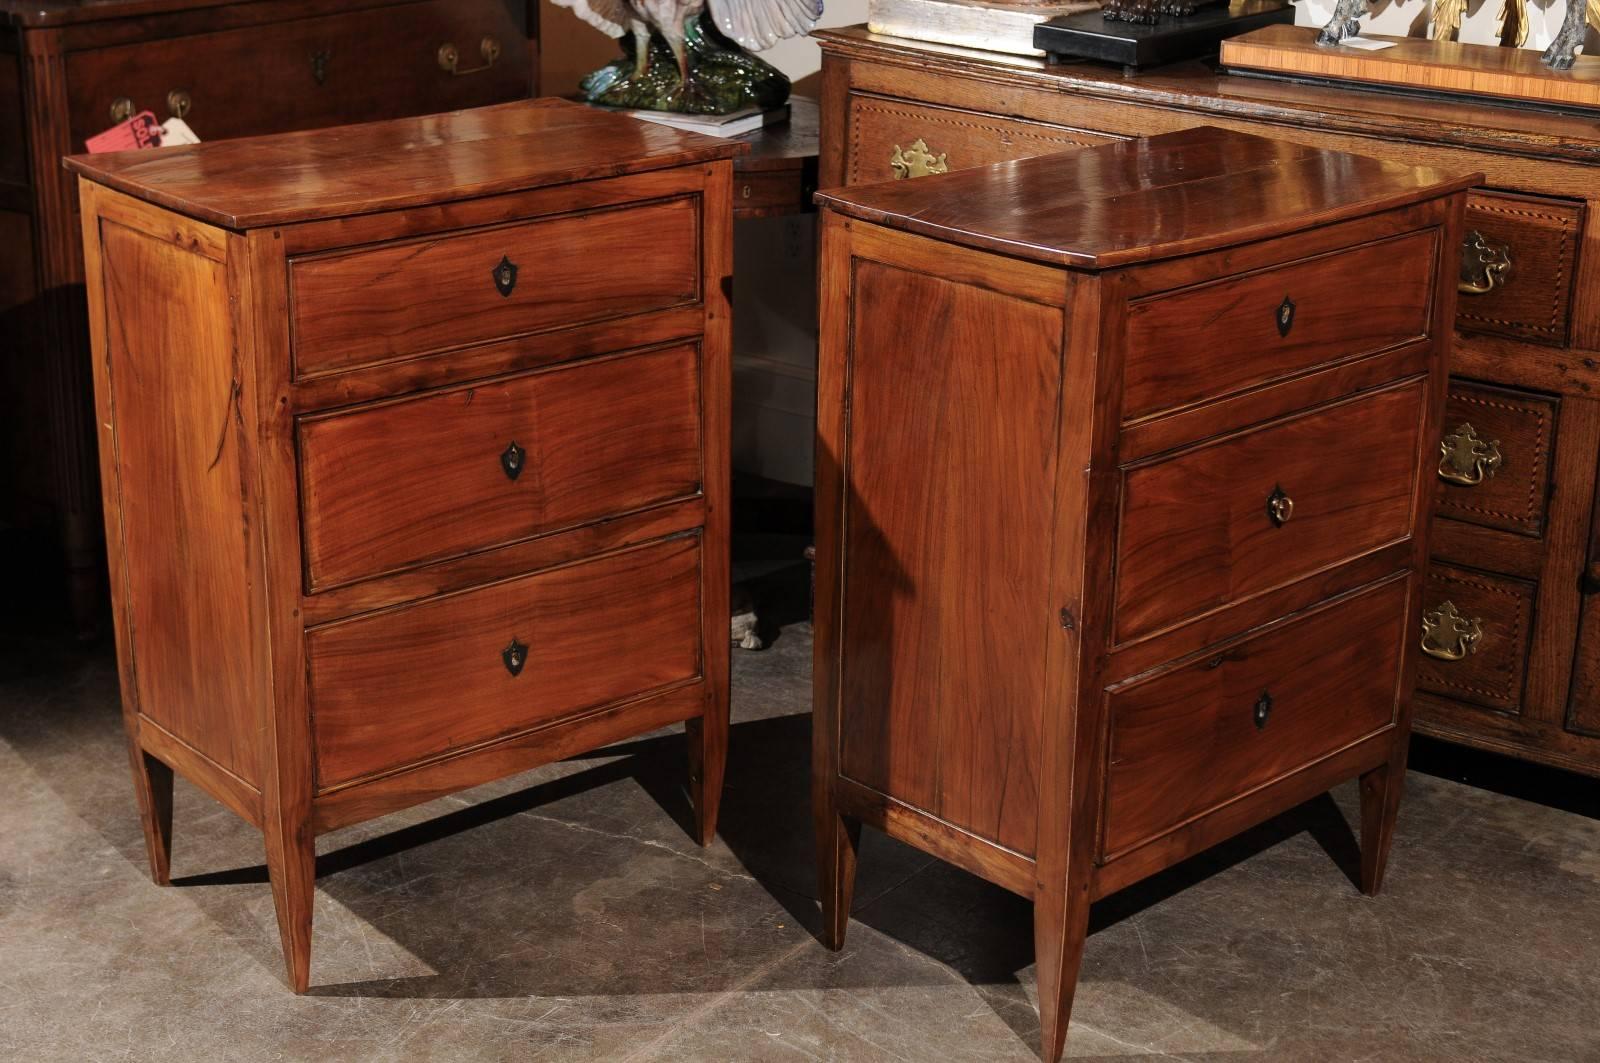 This pair of French Directoire style small commodes from the early 20th century are made of cherrywood. A rectangular top sits over three drawers adorned with a central escutcheon shaped as a shield. The sides are made of recessed panels. The